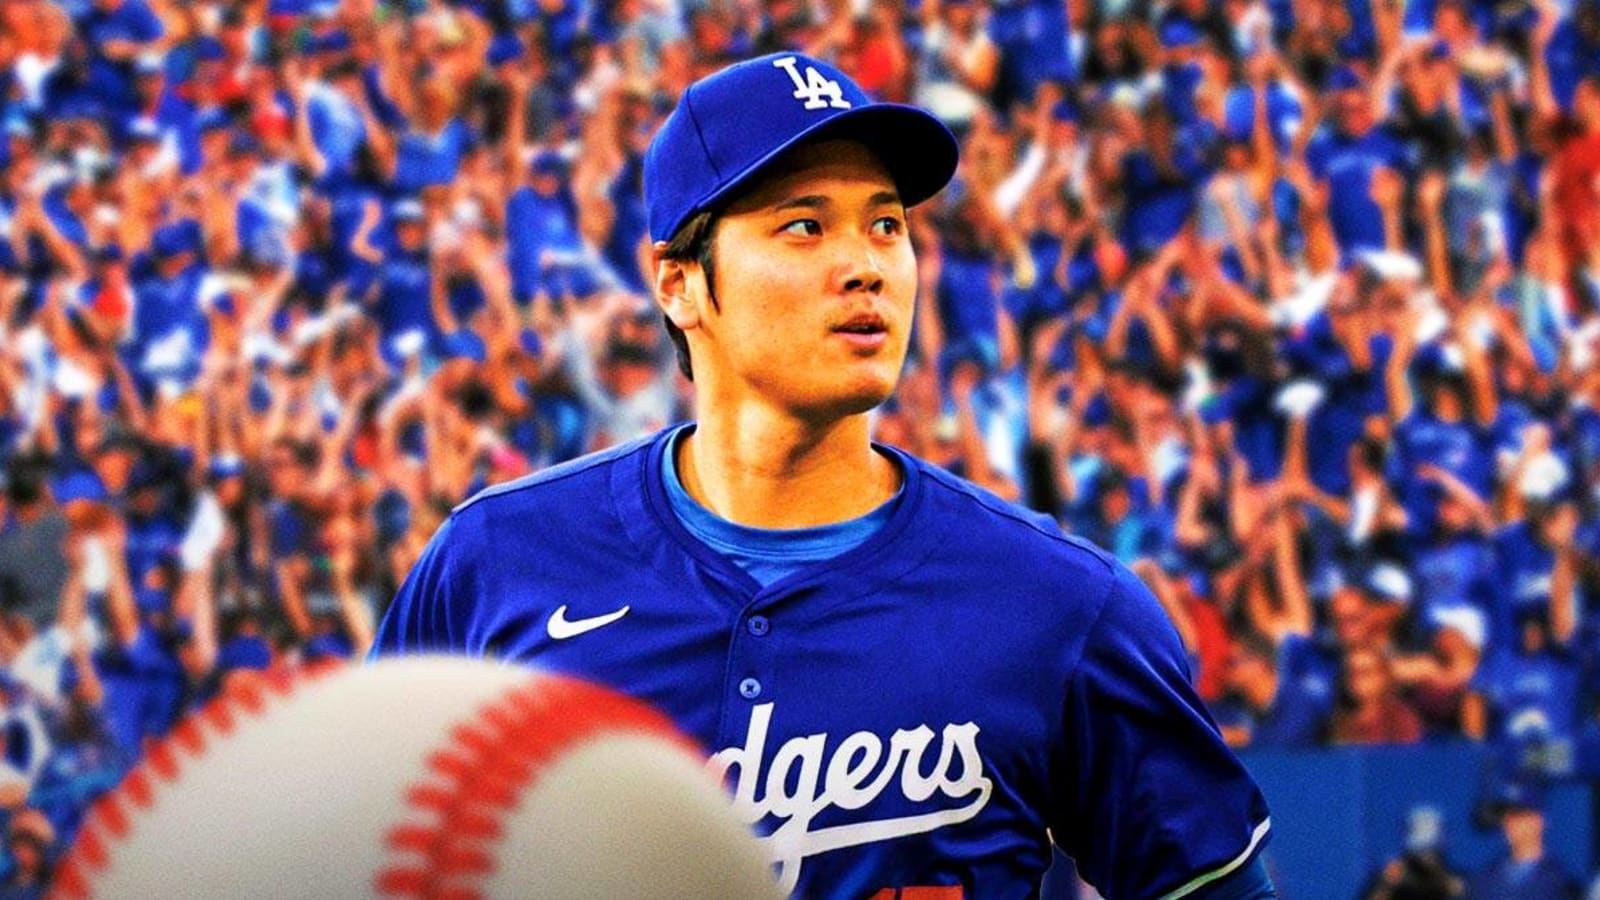 Dodgers’ Shohei Ohtani reacts to getting booed by Blue Jays fans